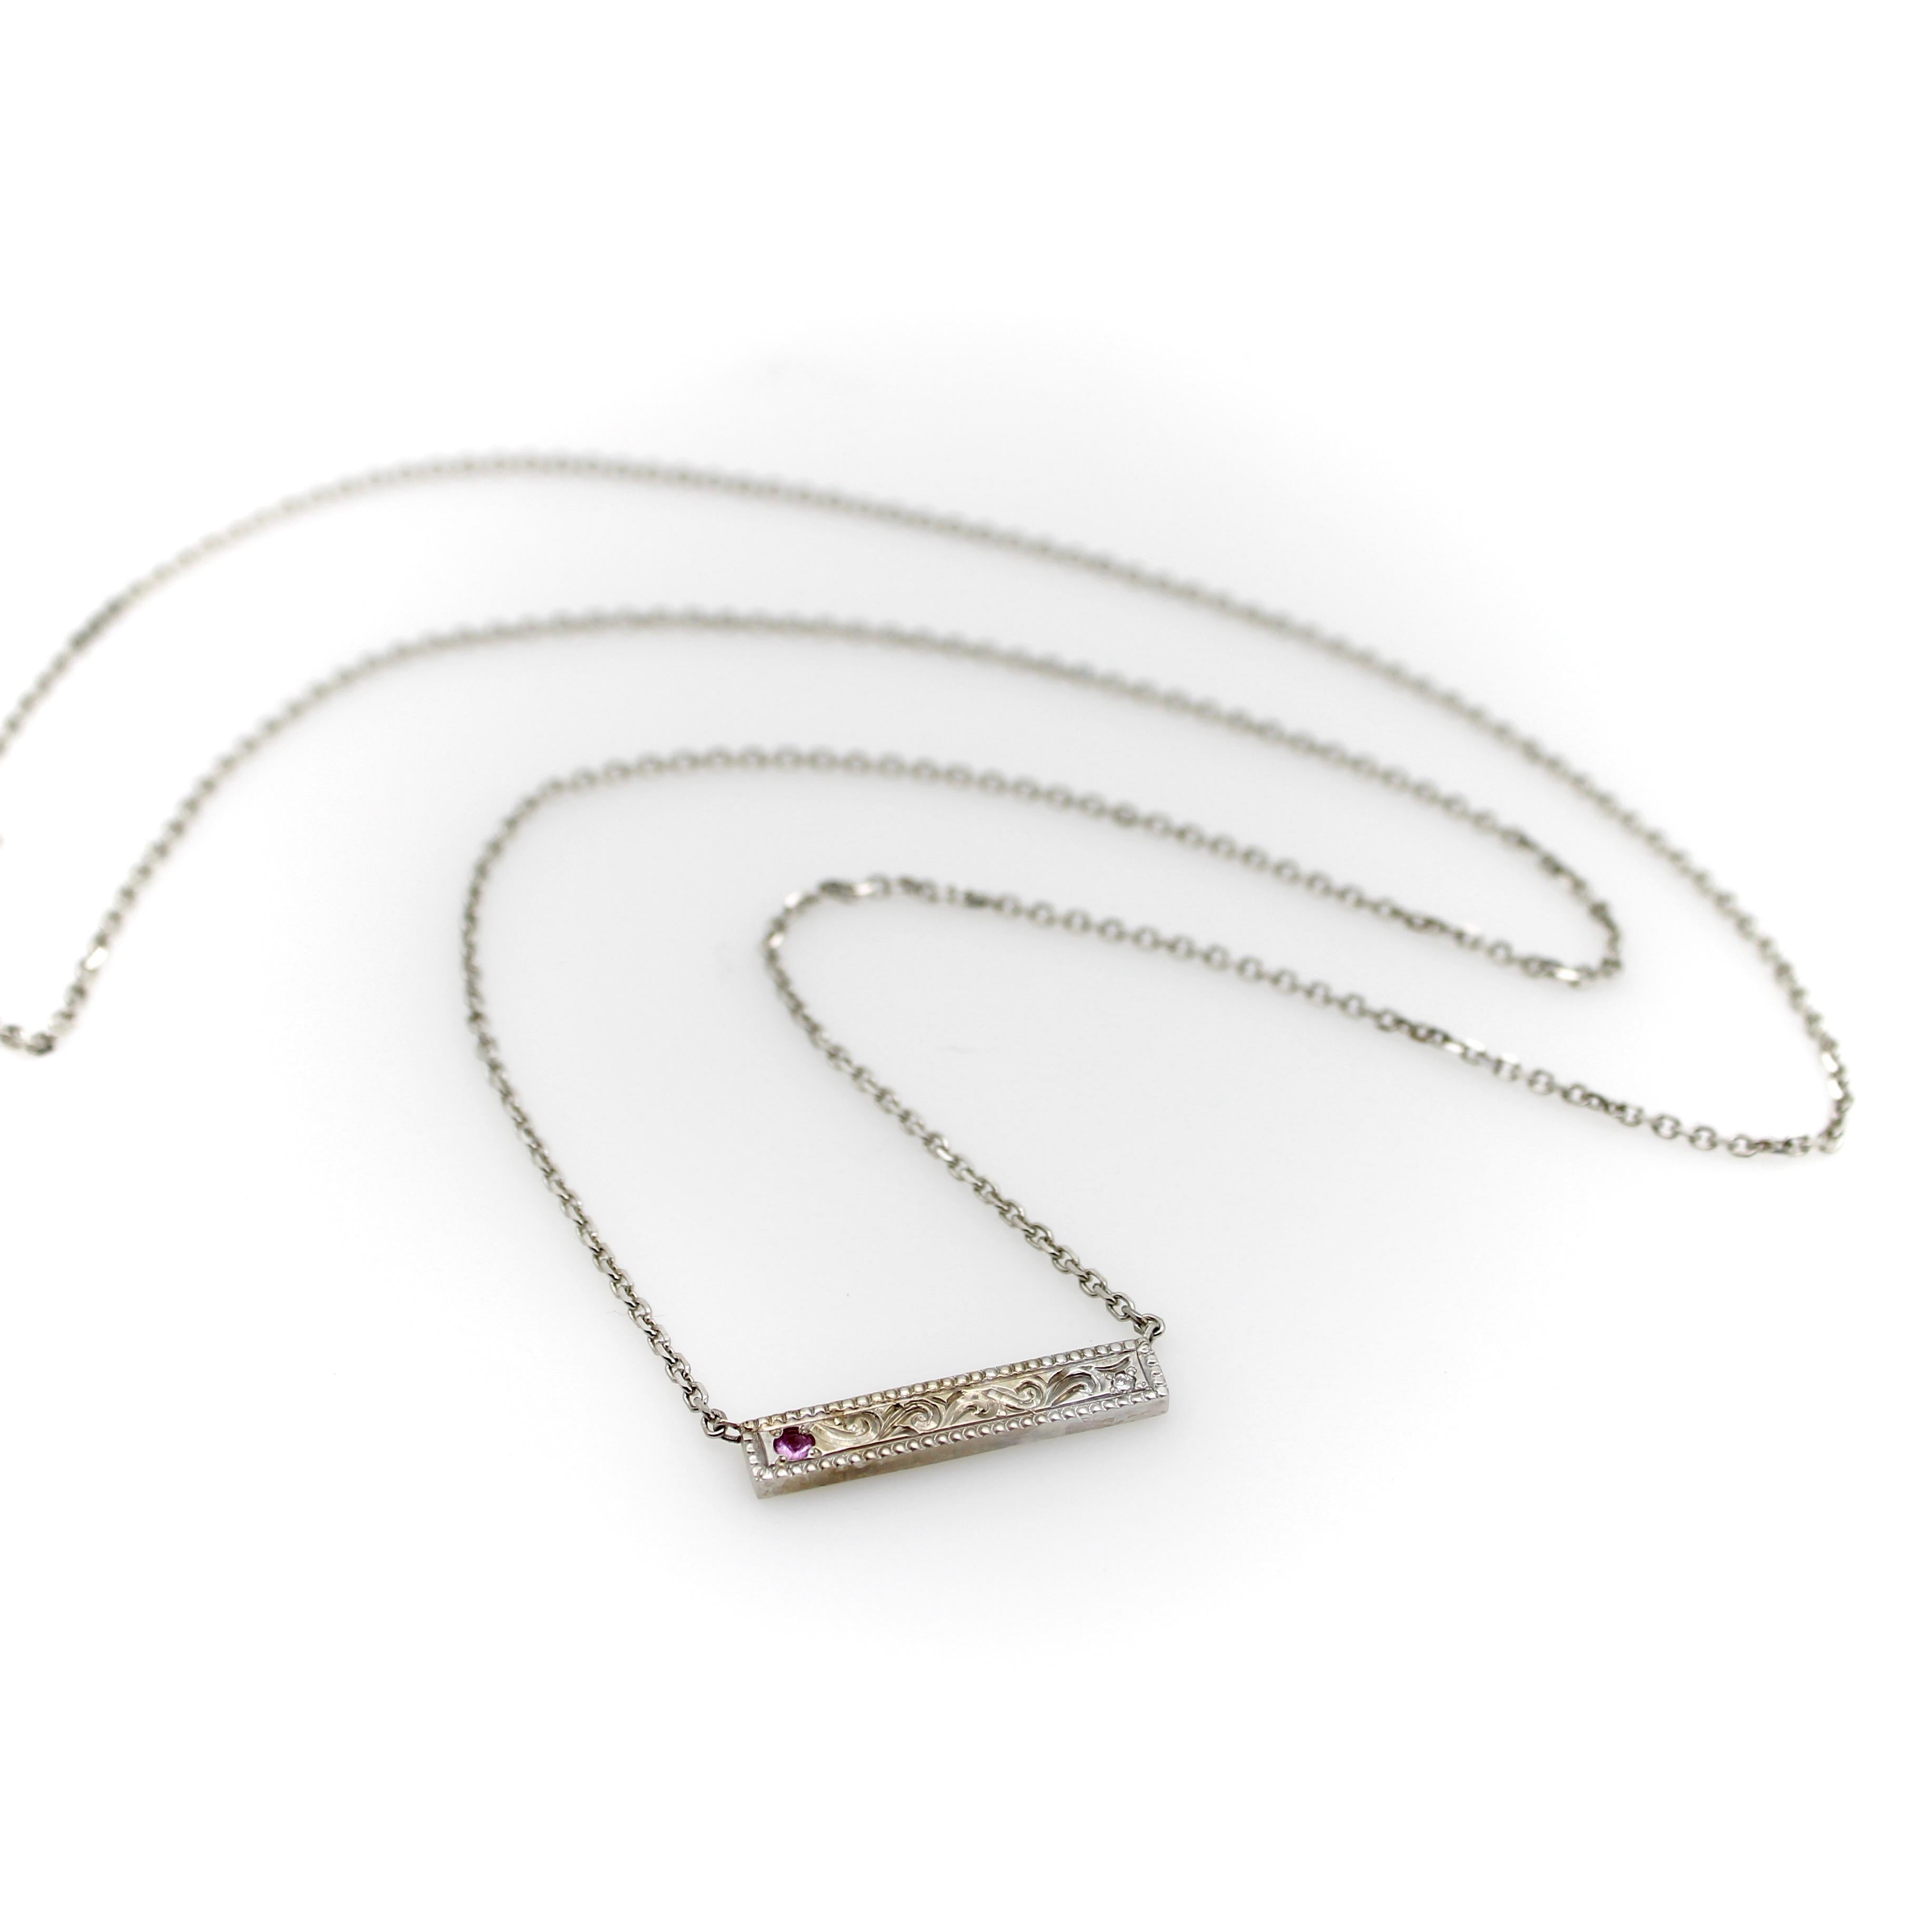 This one-of-a-kind 14k white gold necklace was handmade by Master Jeweler Michael von Krenner. A simple bar of white gold was used as a palate to hand-engrave with traditional scrolling foliate and a beautiful milgrain border. One end of the bar